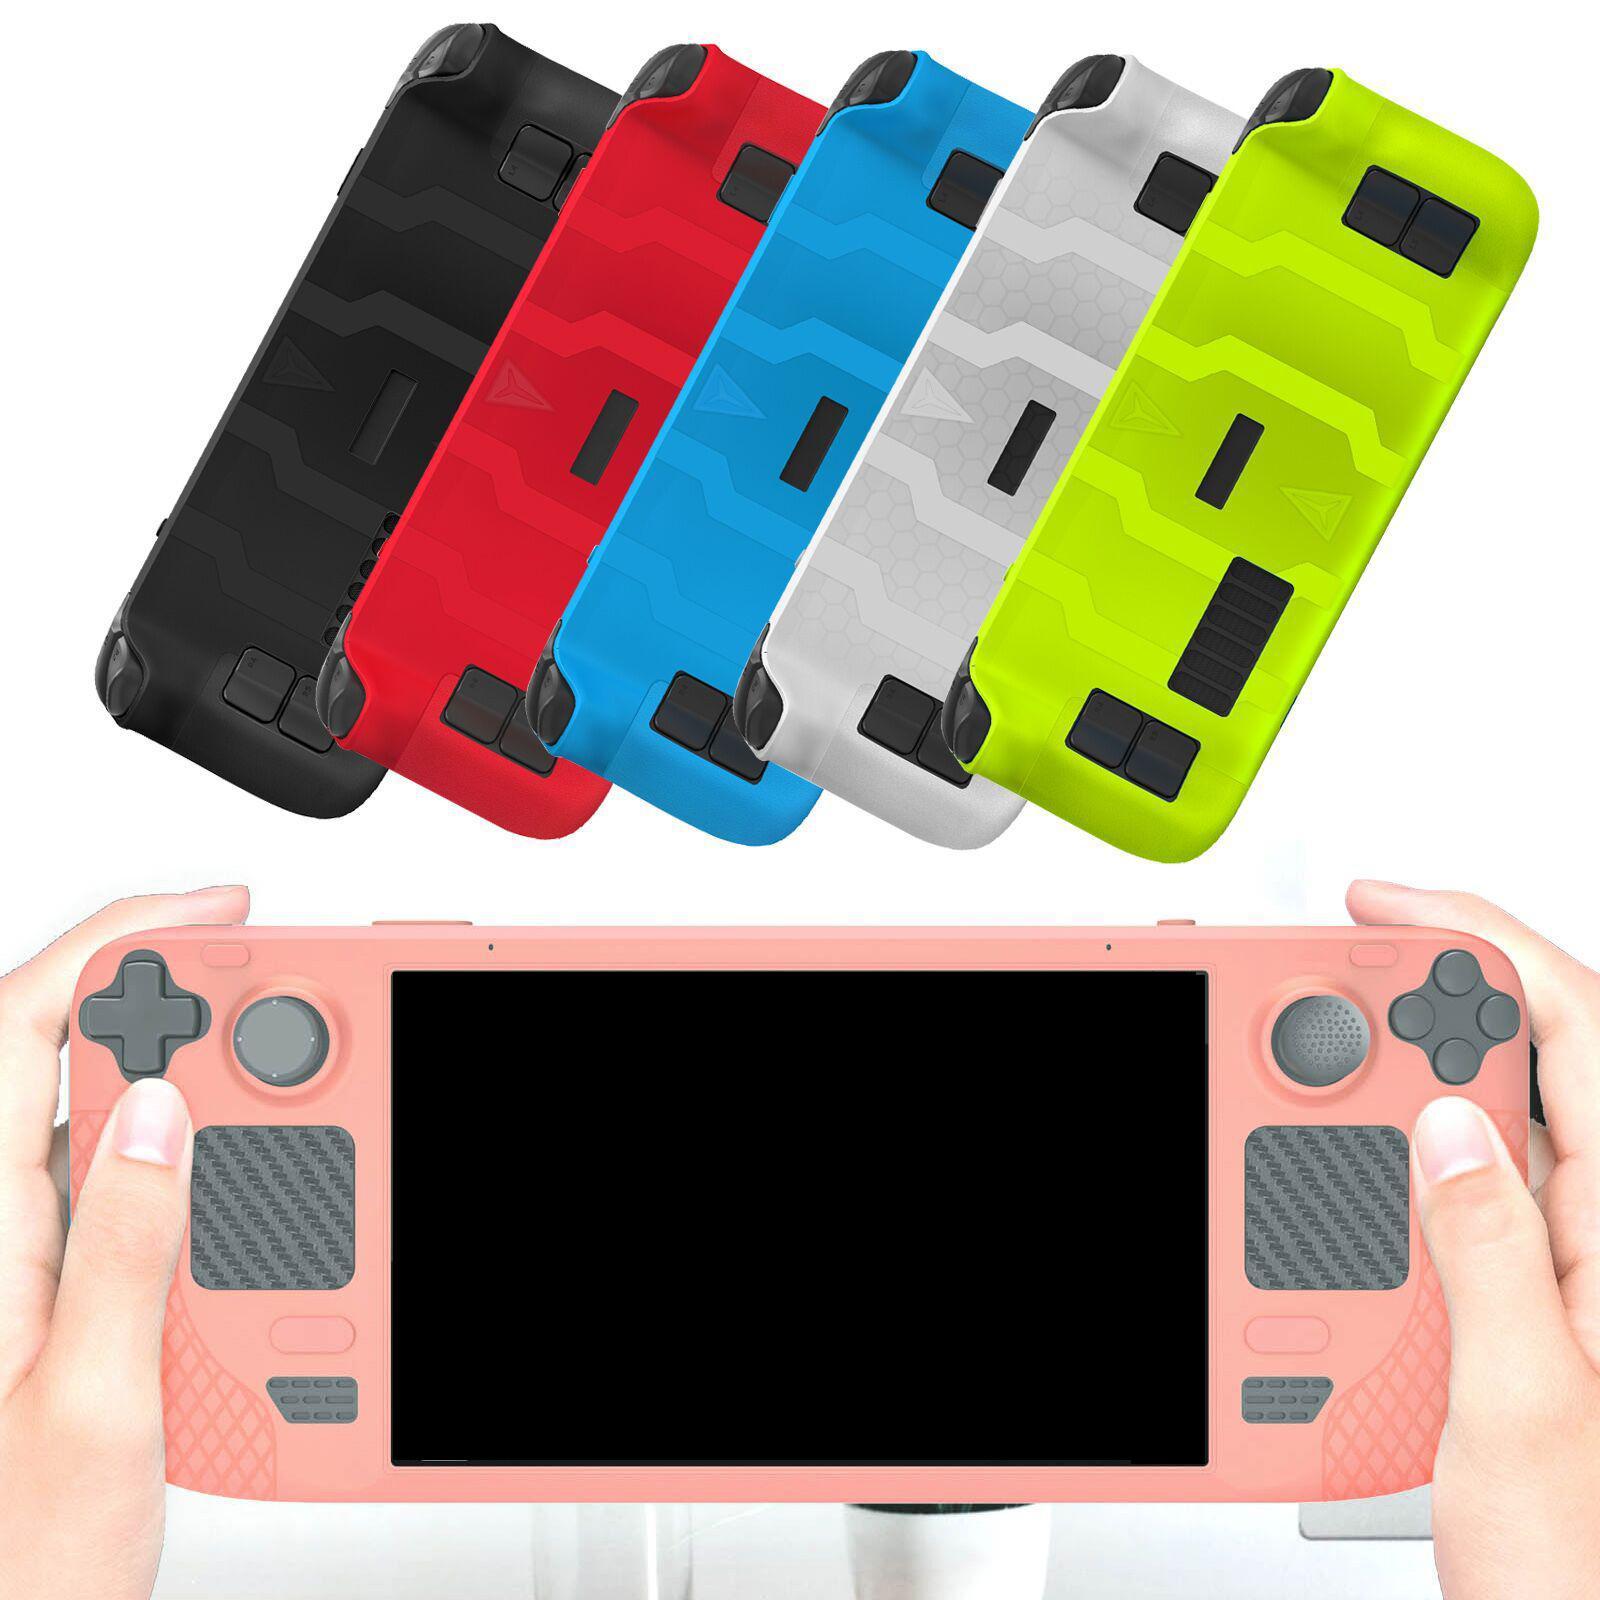 Silicone Case Protector Shell Shockproof Game Accessory for Game Console